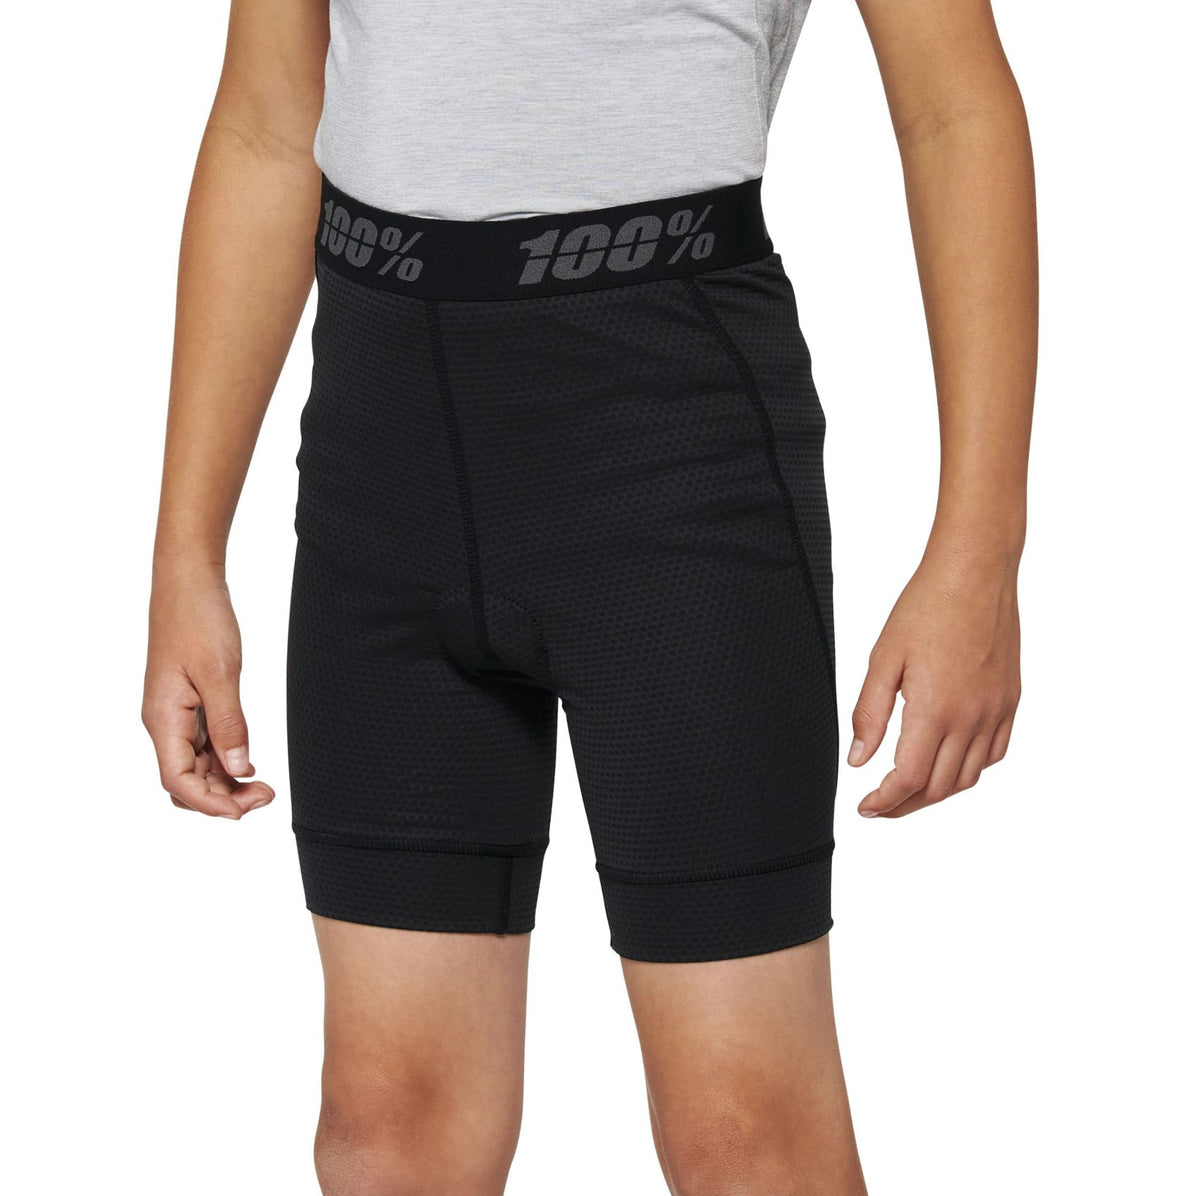 100% Ridecamp Youth Shorts with Liner